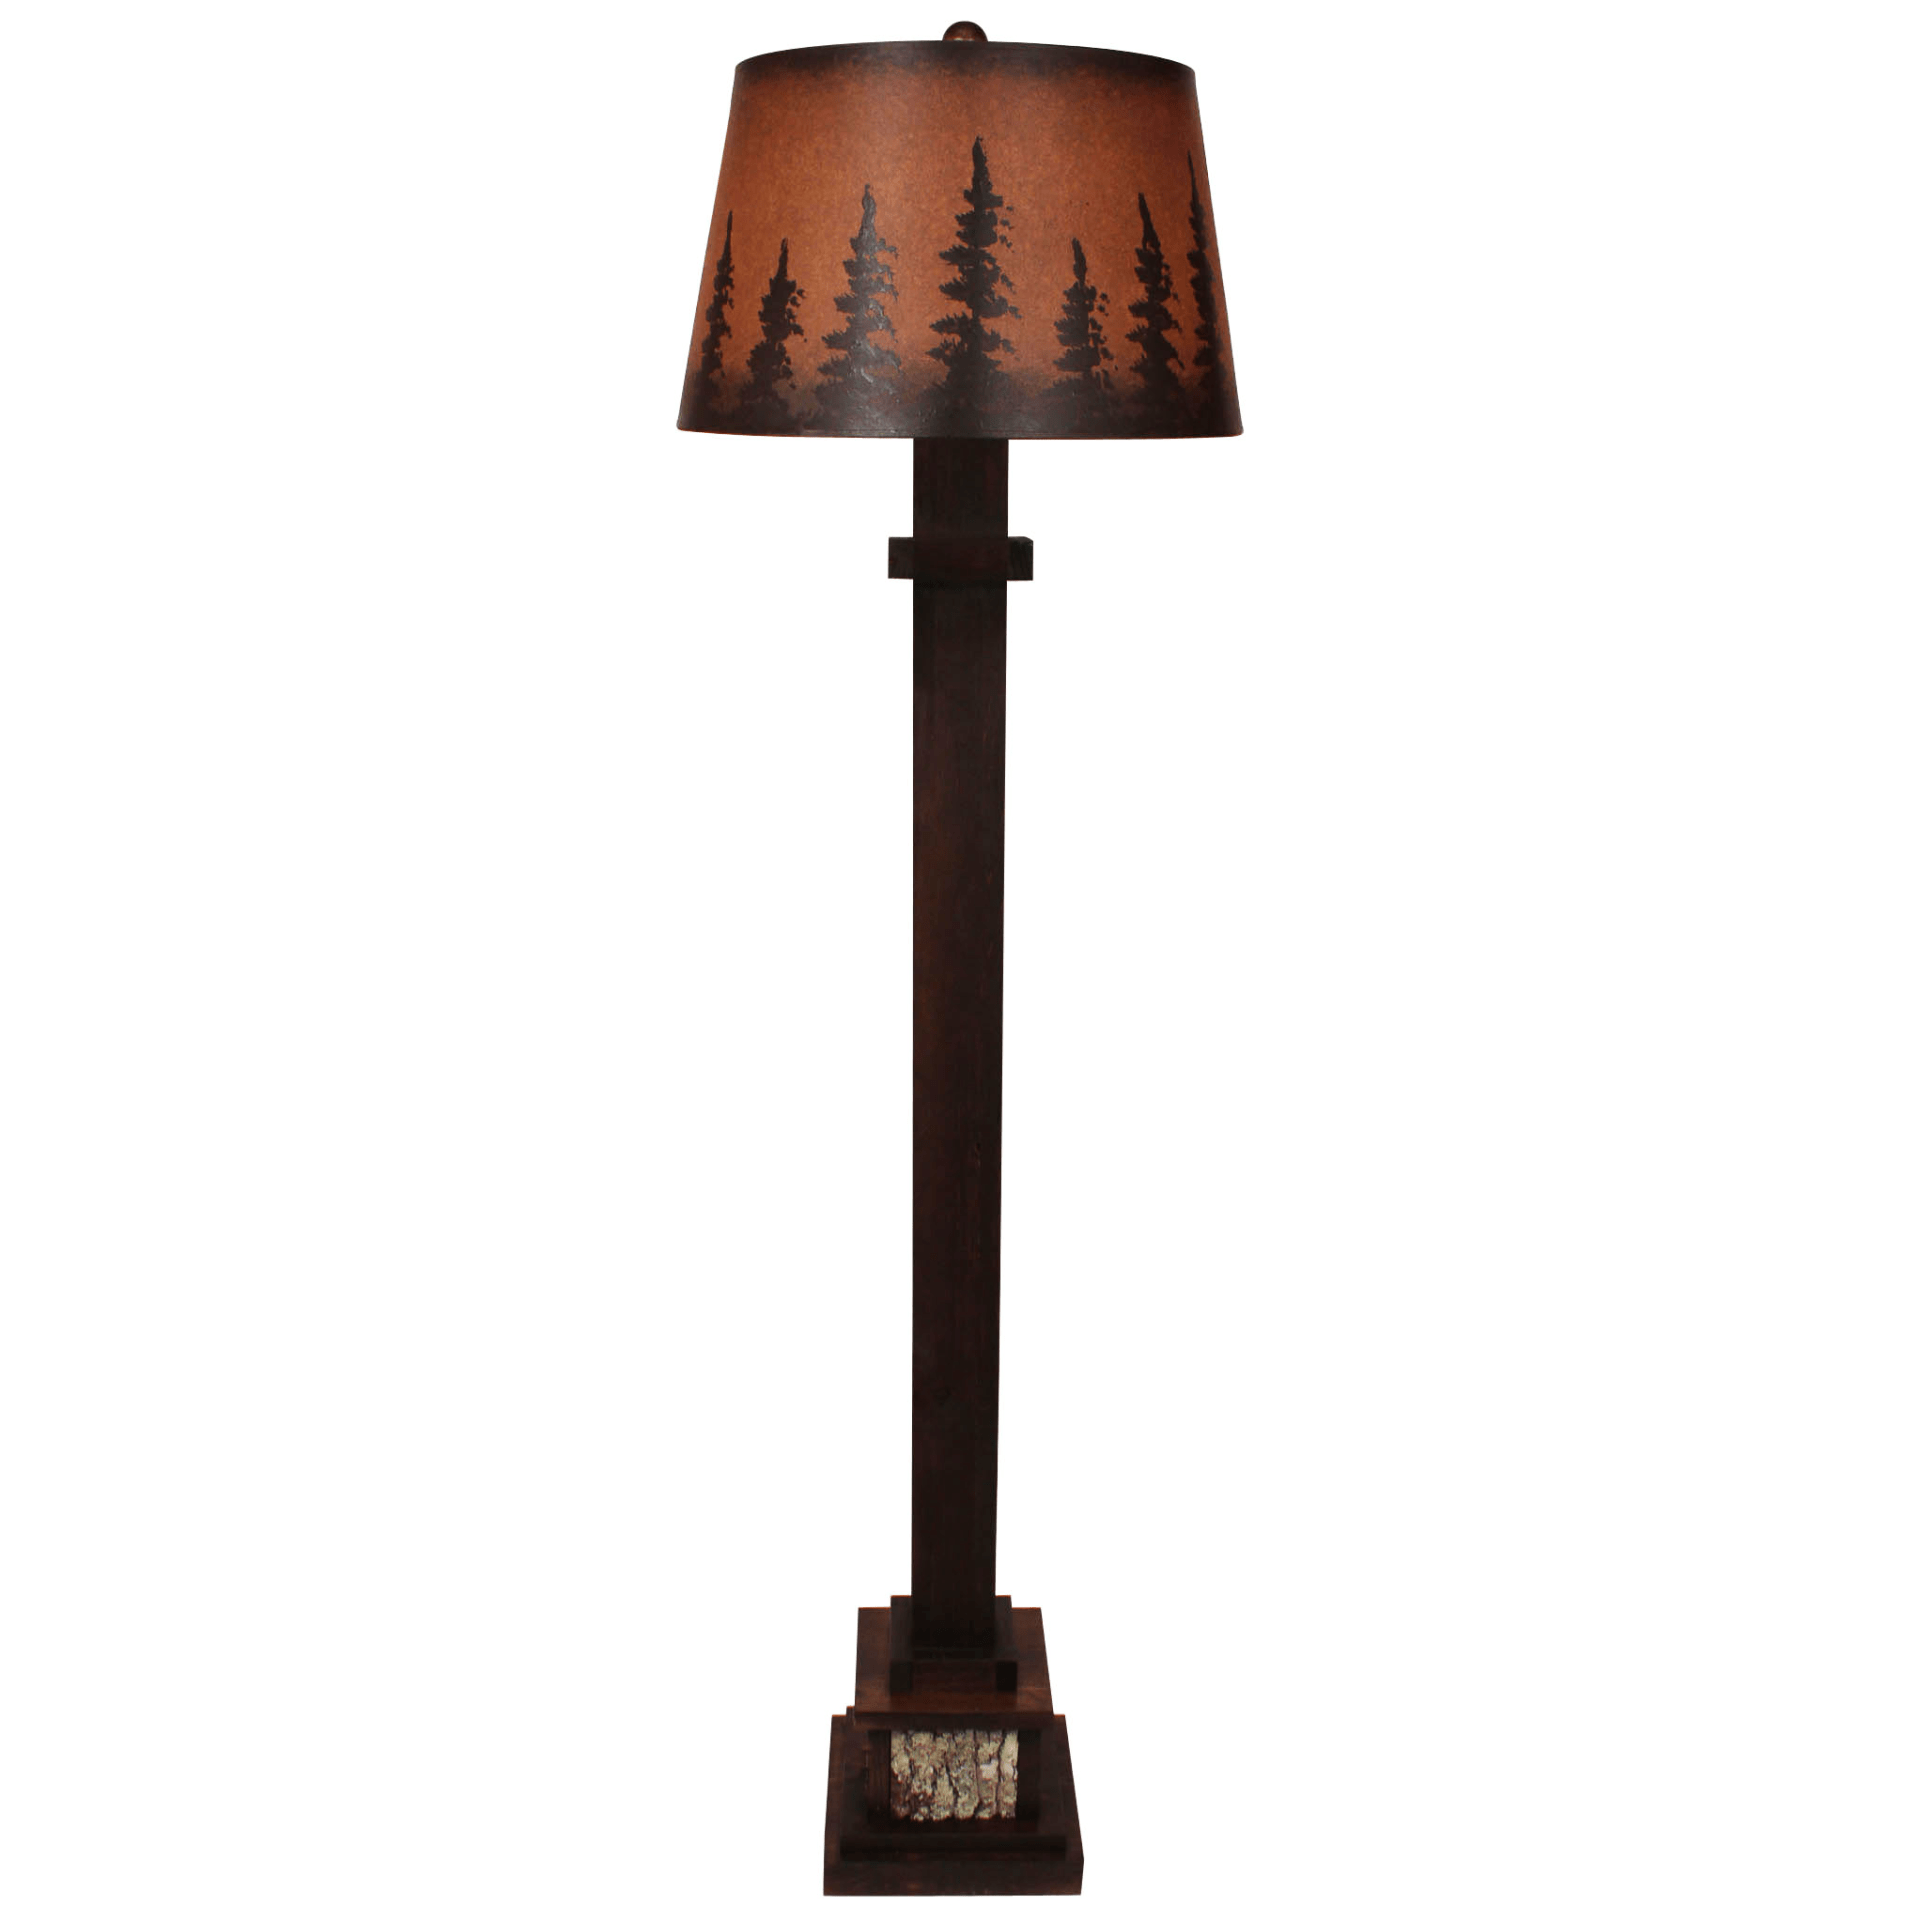 Mission Style Floor Lamp with Poplar Bark Accents